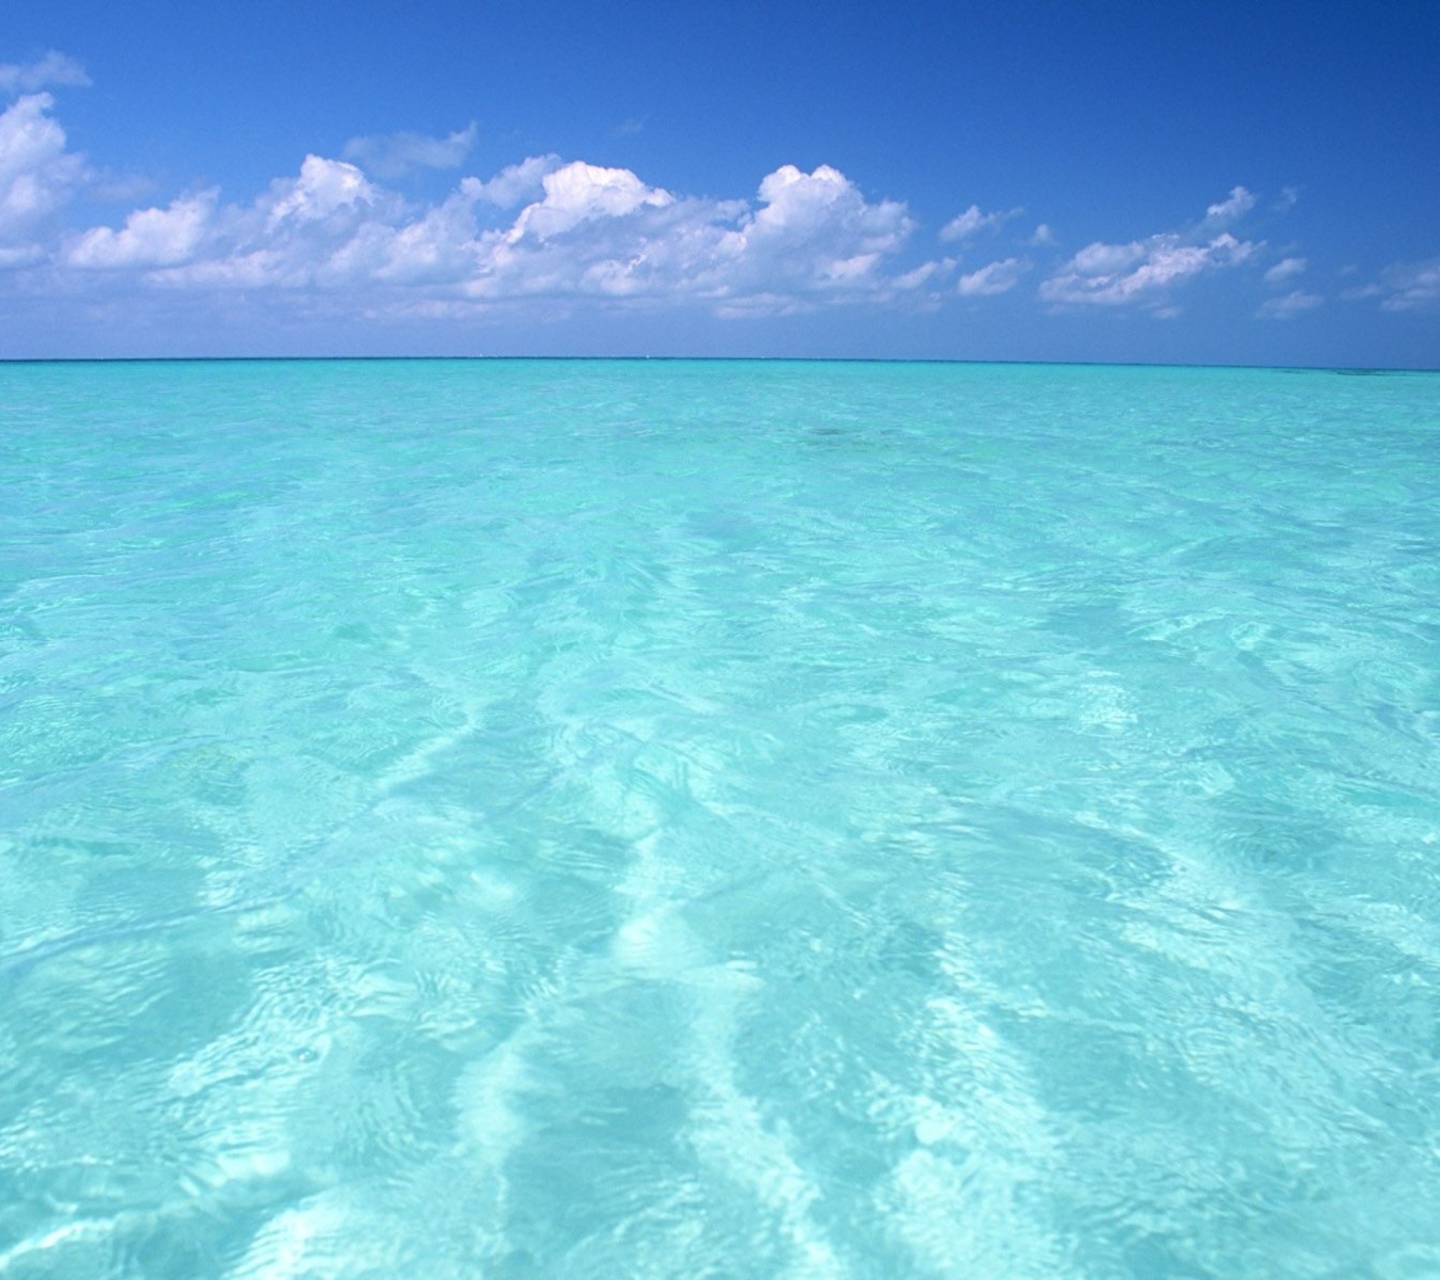 Teal Water And Blue Sky wallpaper 1440x1280